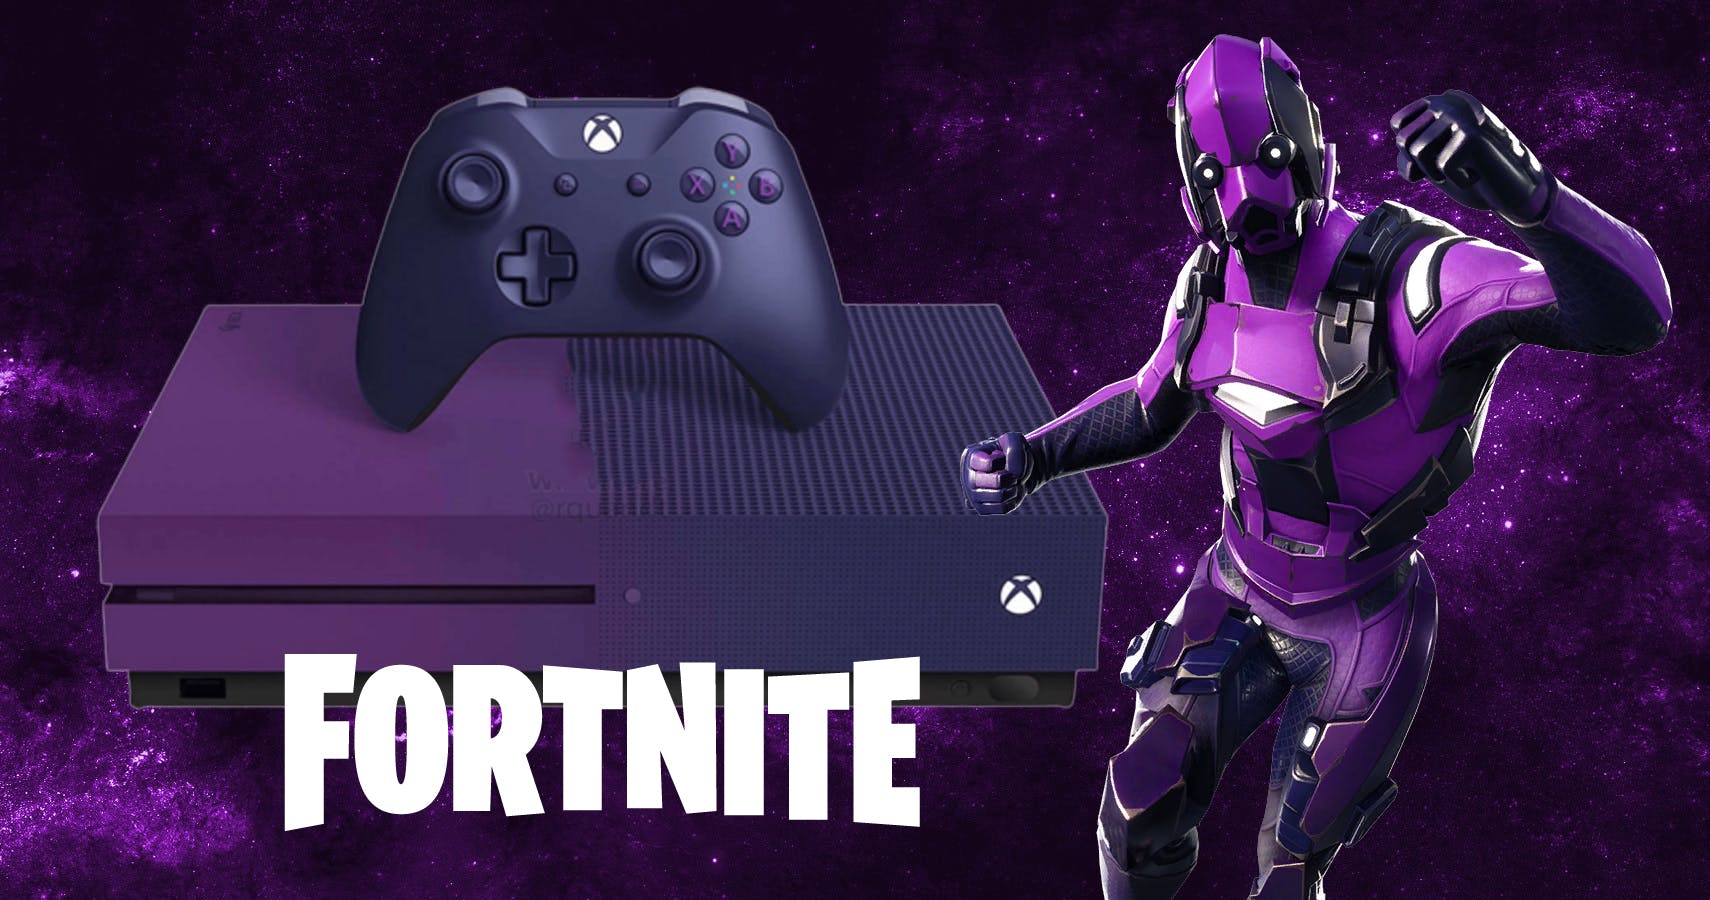 Xbox Releases New Fortnite Special Edition Wireless Controller, Time To Earn That Victory Royale